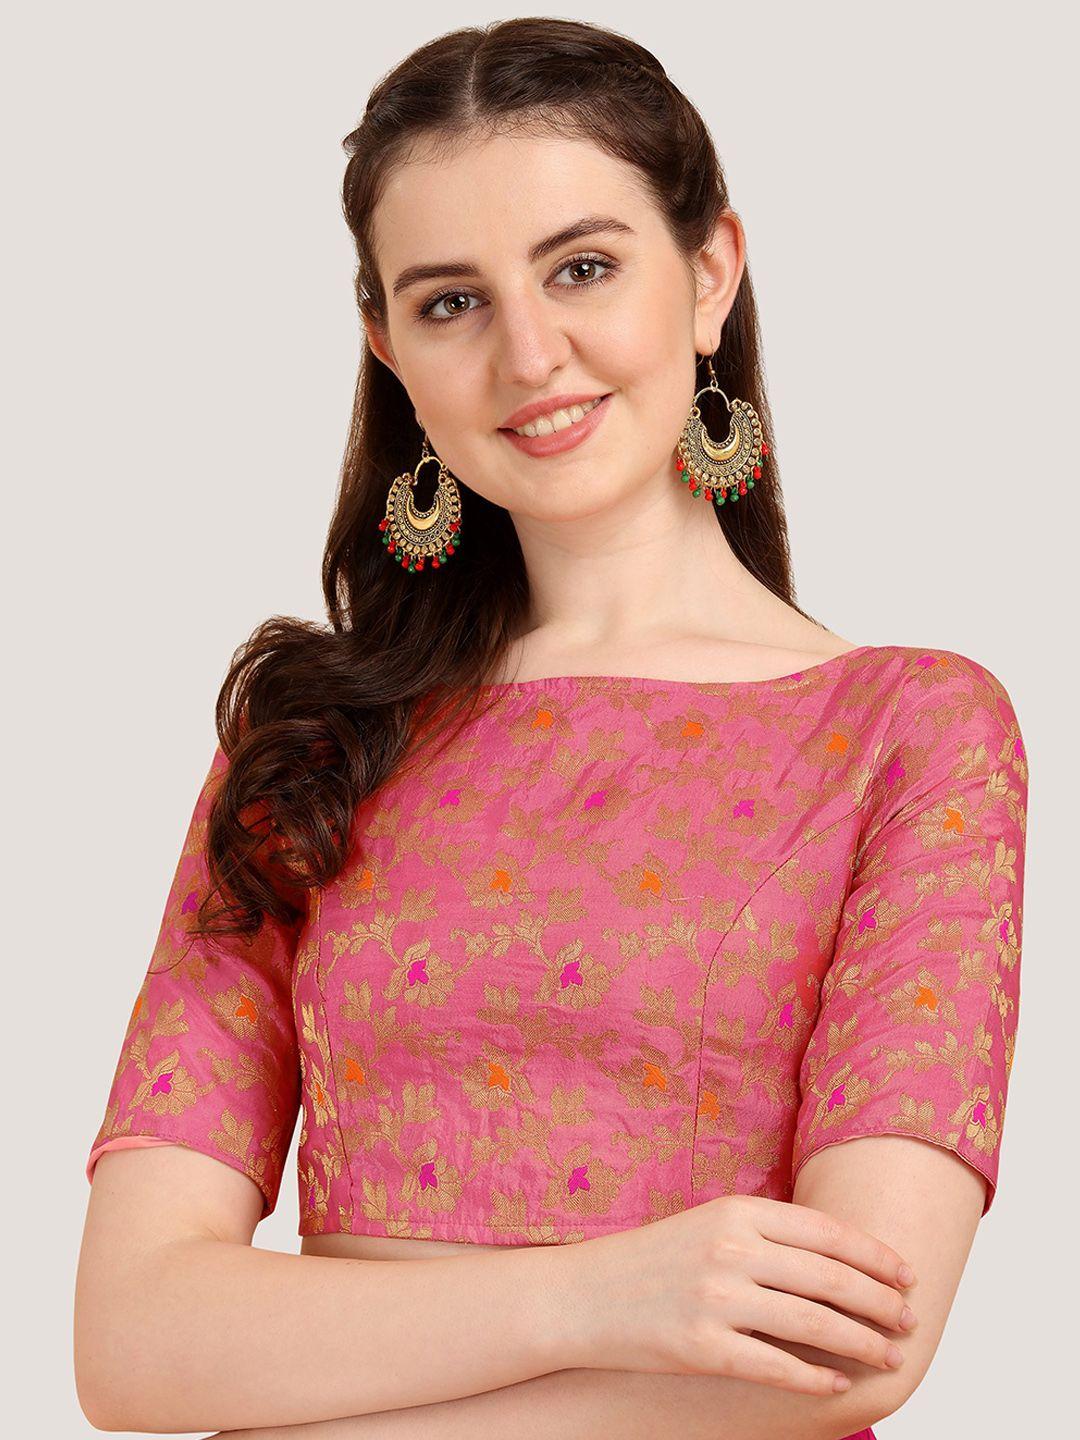 oomph! floral woven design saree blouse